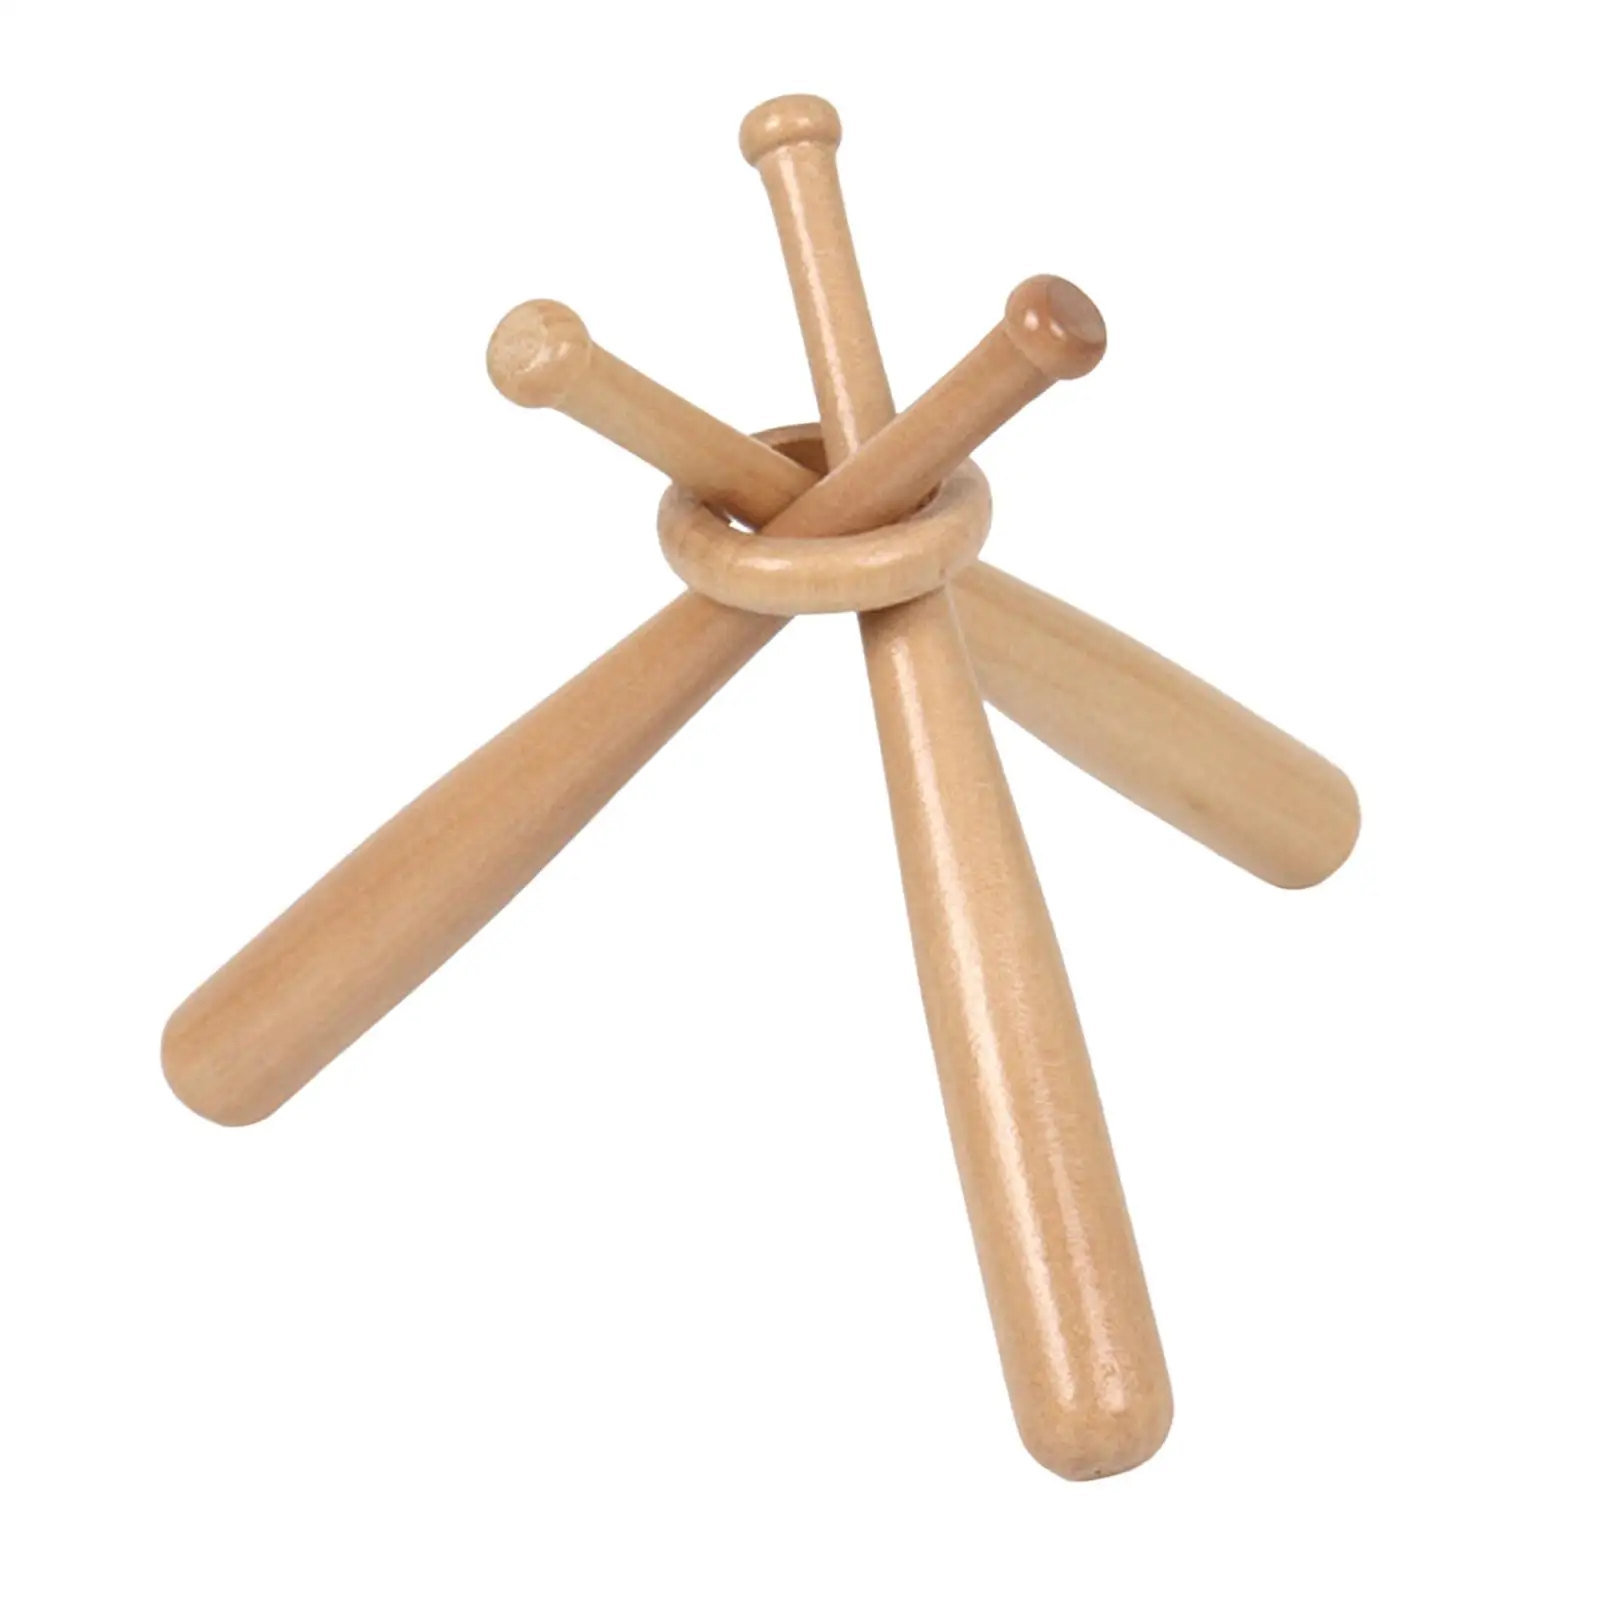 Souvenir Ball Support Holder Mini Baseball Stand with Circles Stand Wooden Baseball Stand